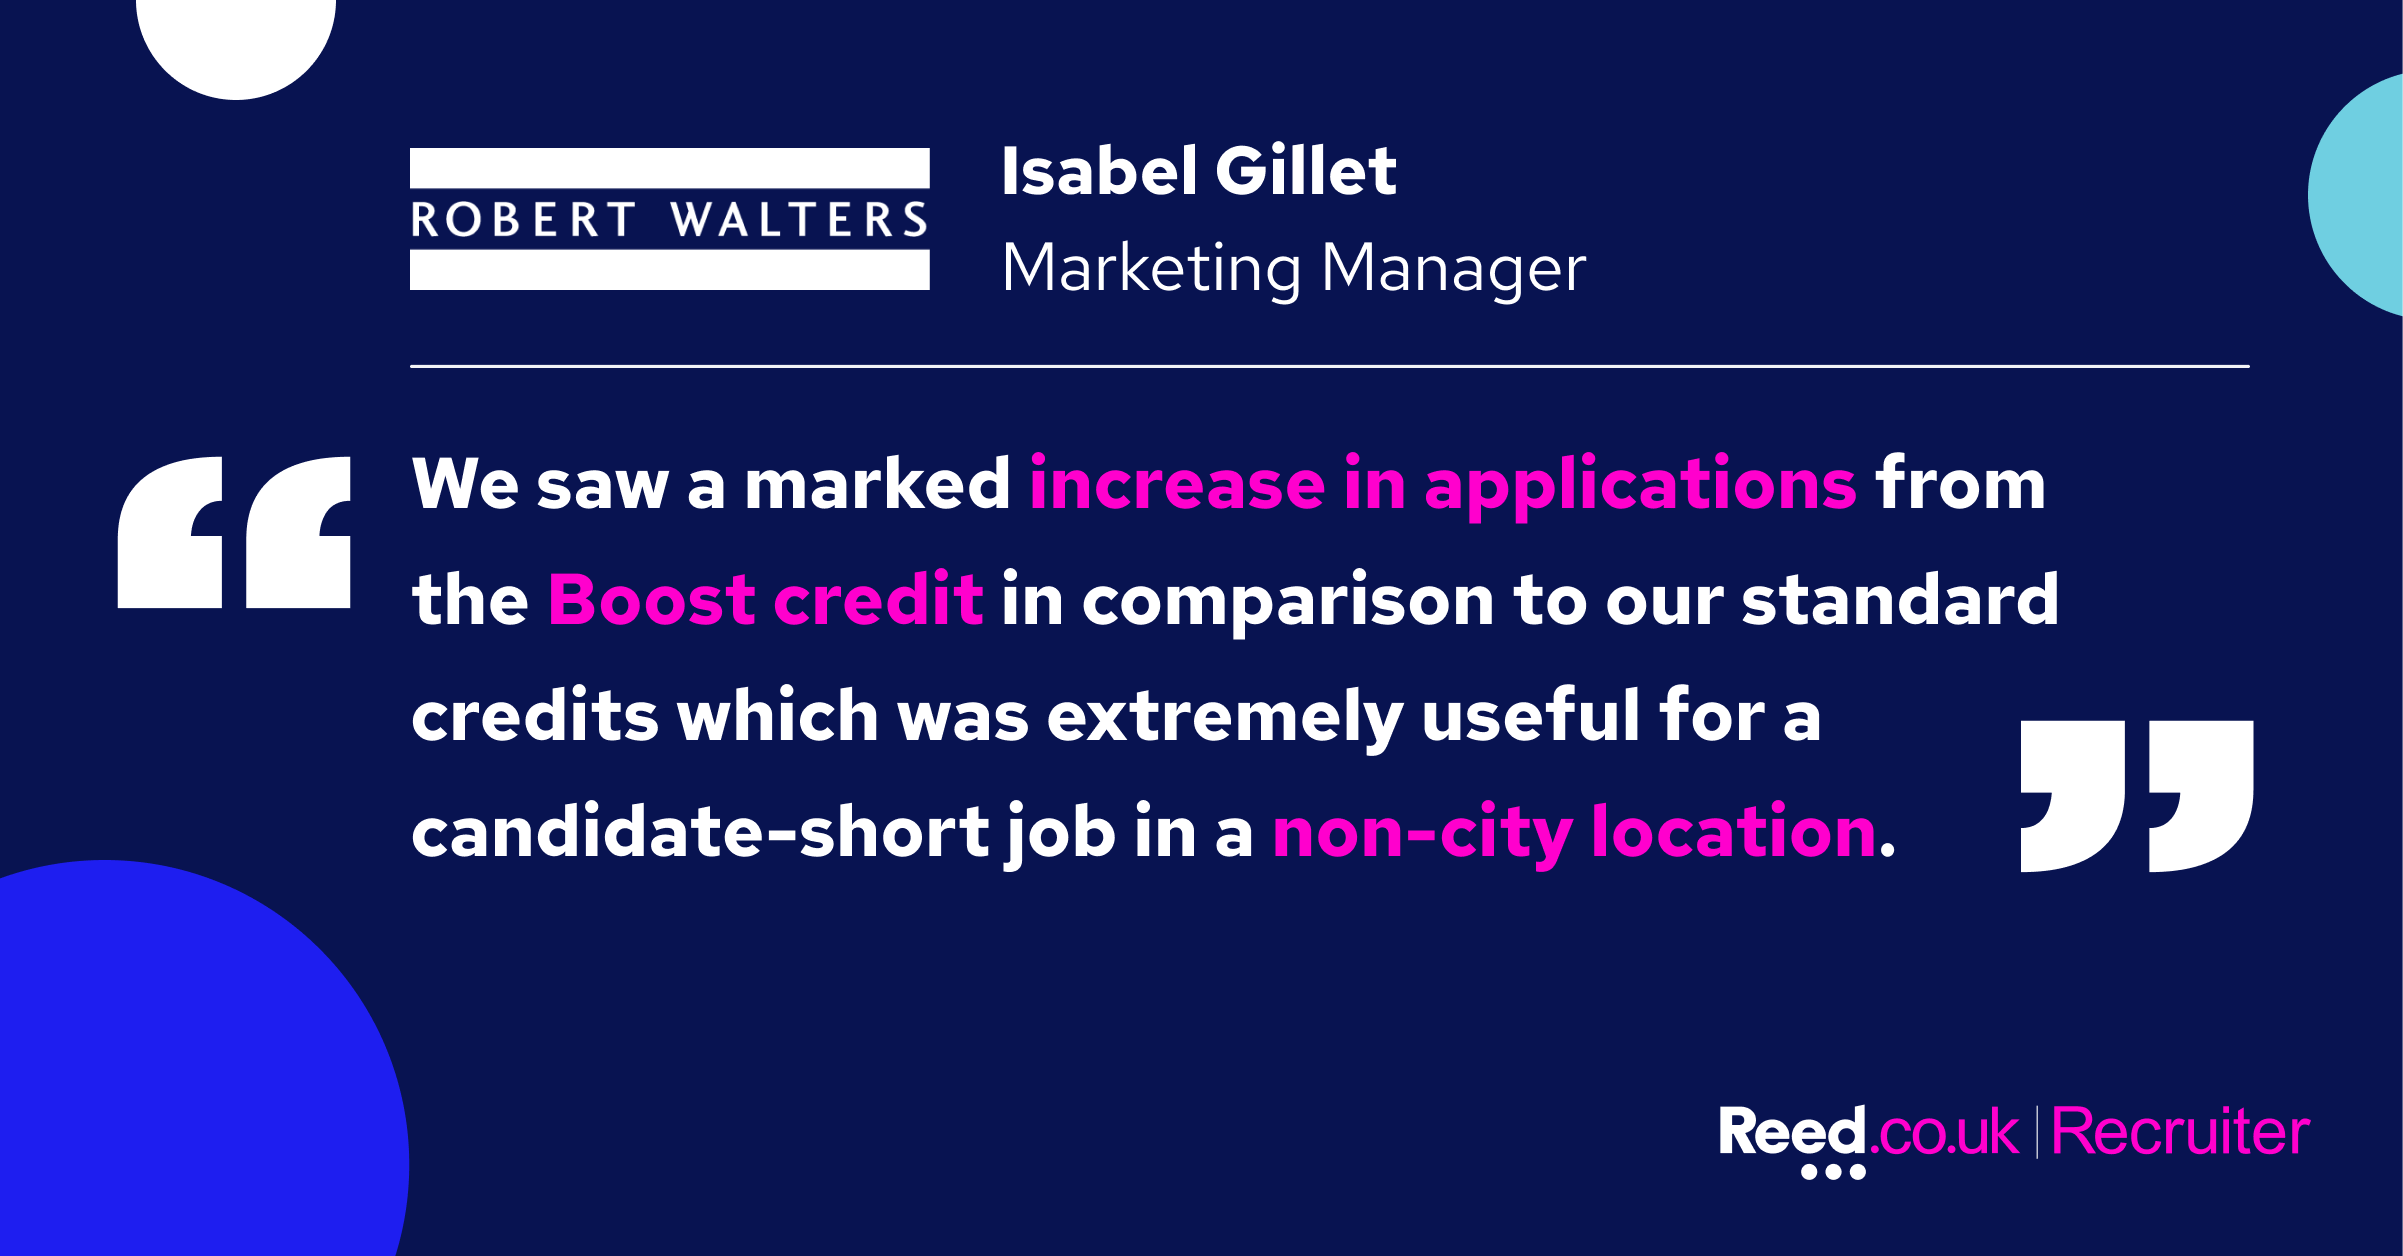 "We saw a marked increase in applications from the Boost credit in comparison to our standard credits which was extremely useful for a candidate-short job in a non-city location." Isabel Gillet, Marketing Manager at Robert Walters